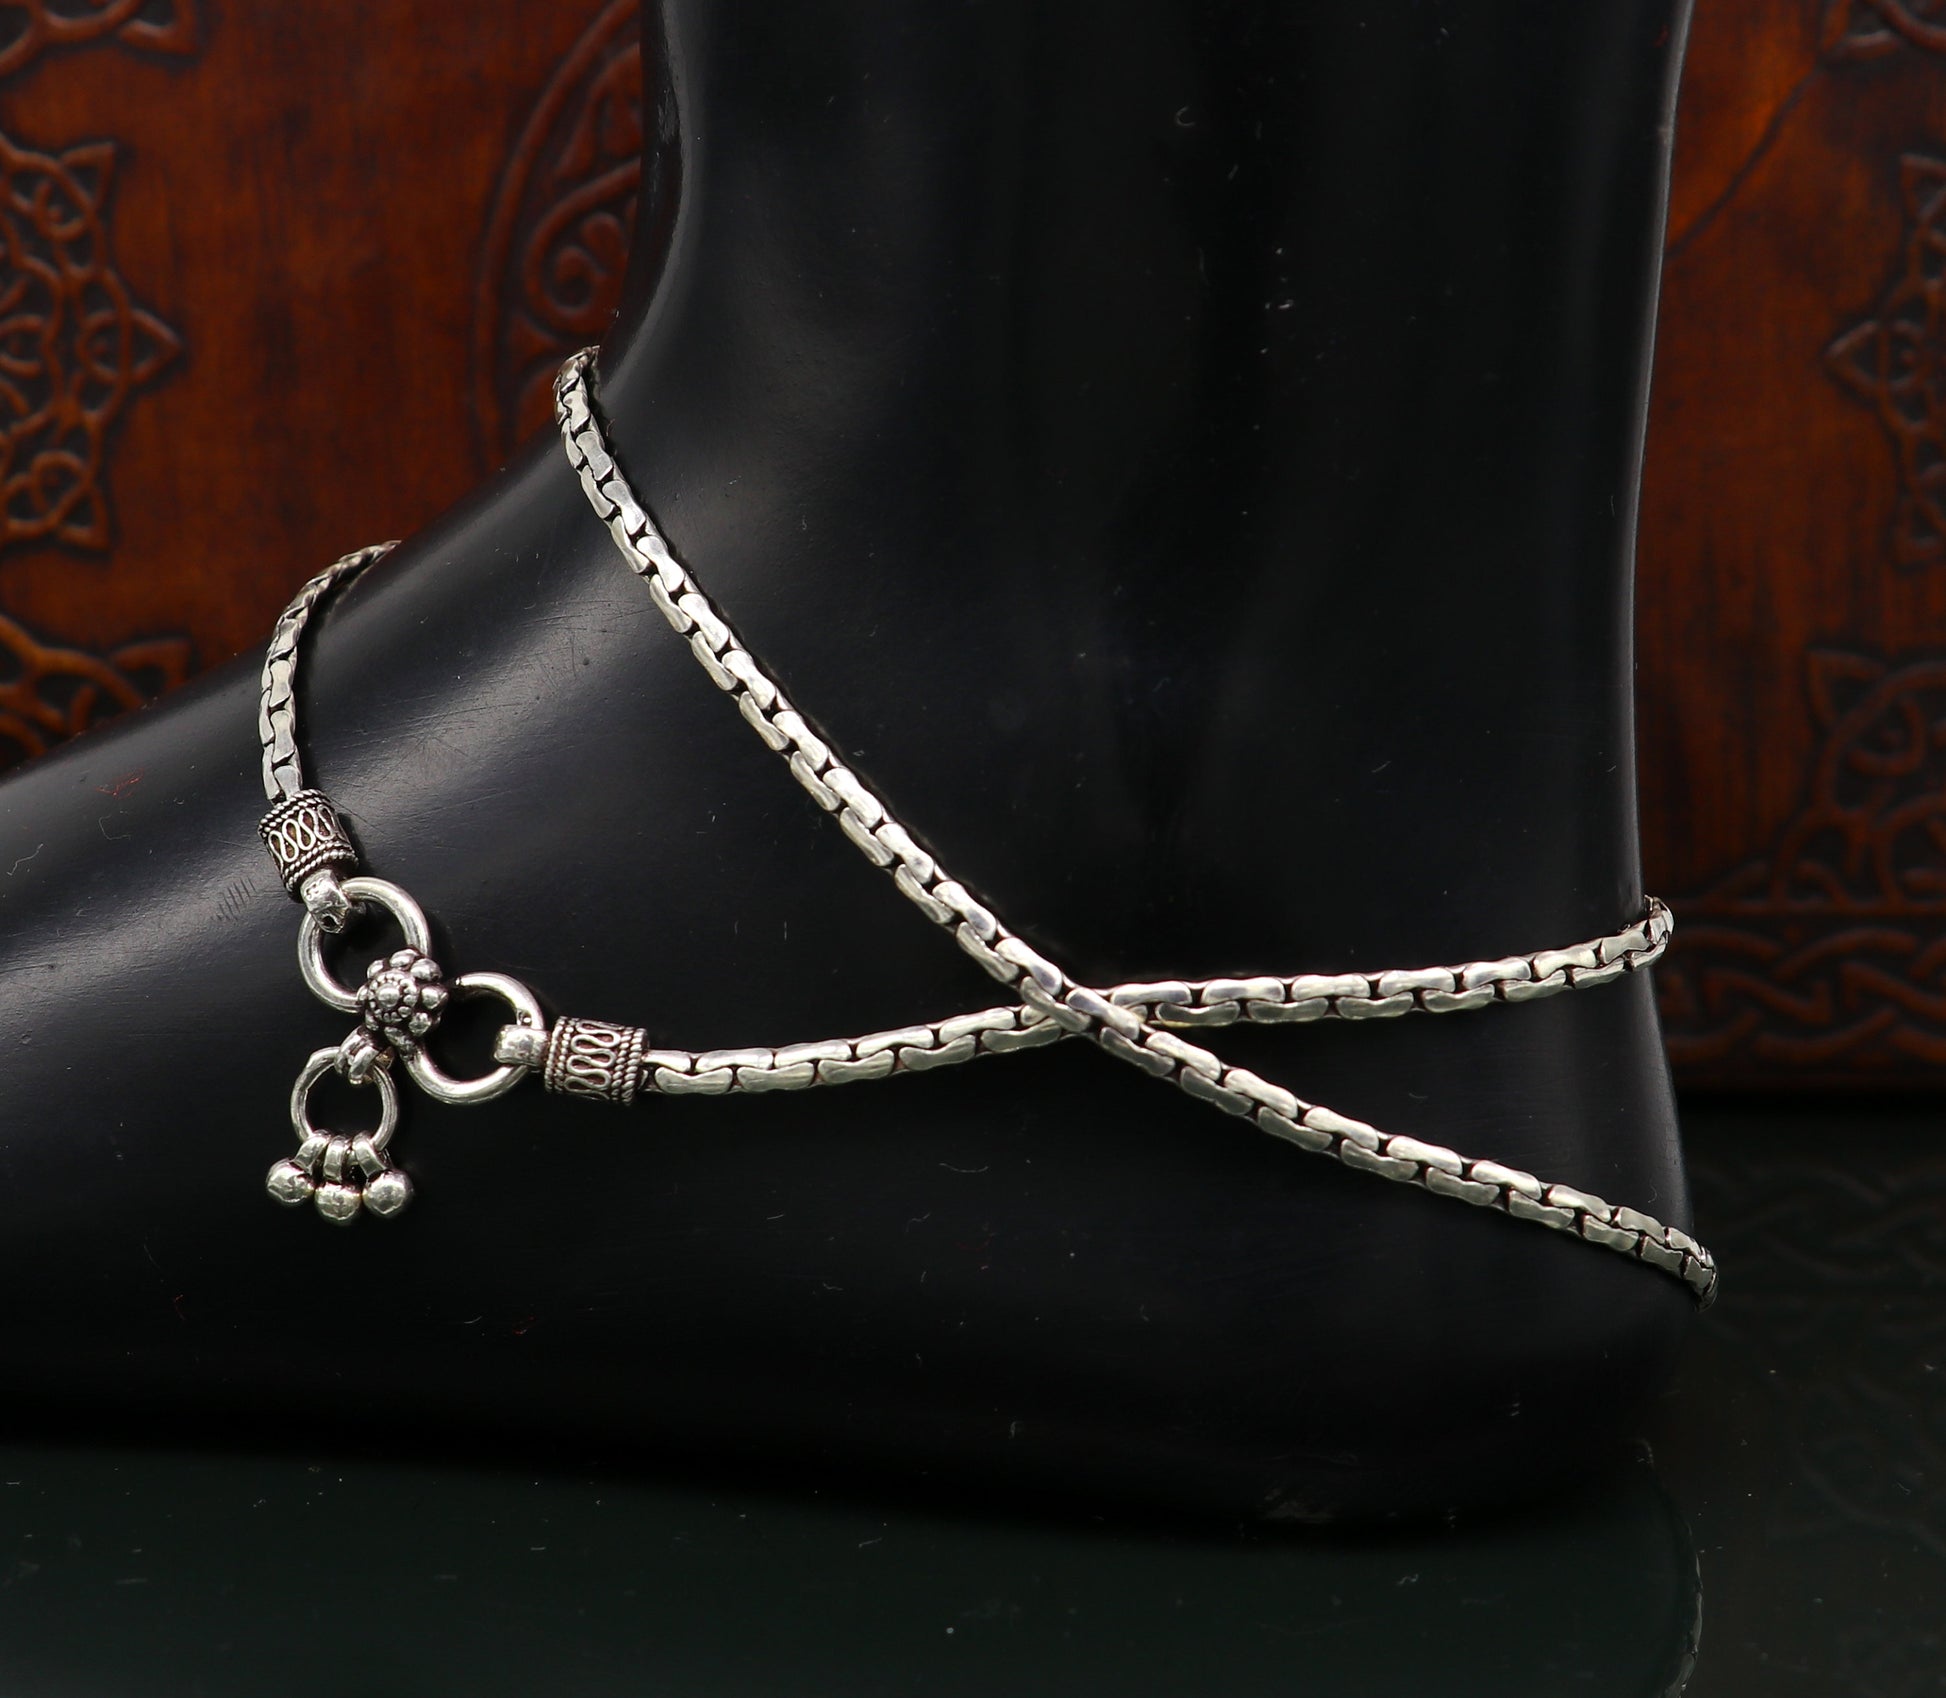 10.5" pure 925 sterling silver handmade solid gorgeous light weight chain anklets pair, trendy foot bracelet jewelry gift to her ank336 - TRIBAL ORNAMENTS